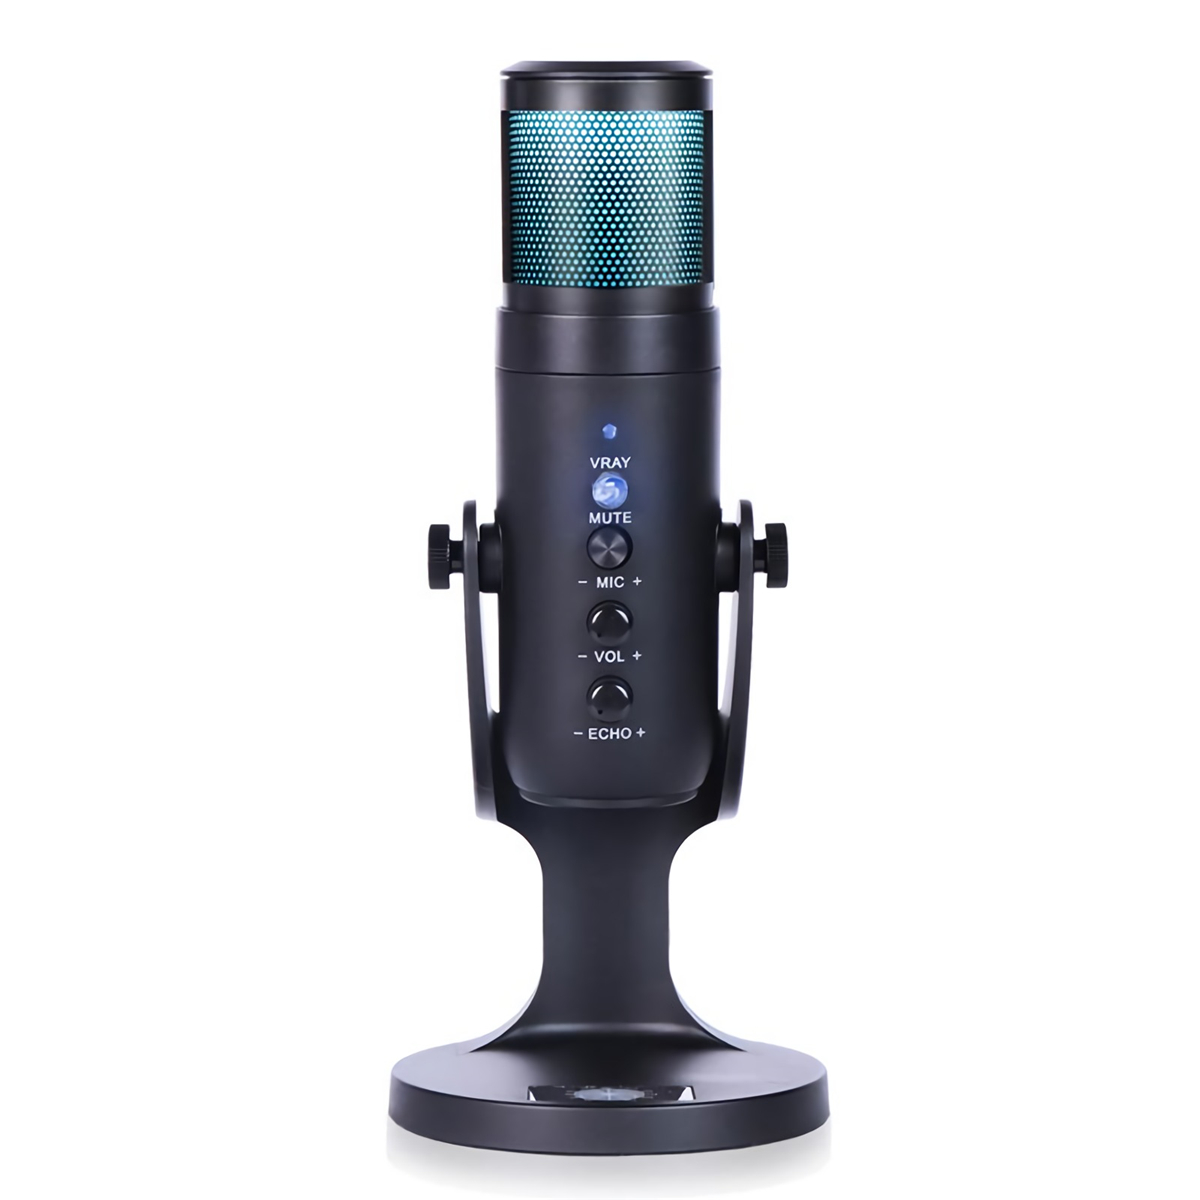 DLDZ D-950 RGB Condenser Microphone Type-C Wired Cardioid-Directional Sound Recording Vocal Microphone Gaming Mic for Mobile Phone PC Computer Youtube Live Game Chat